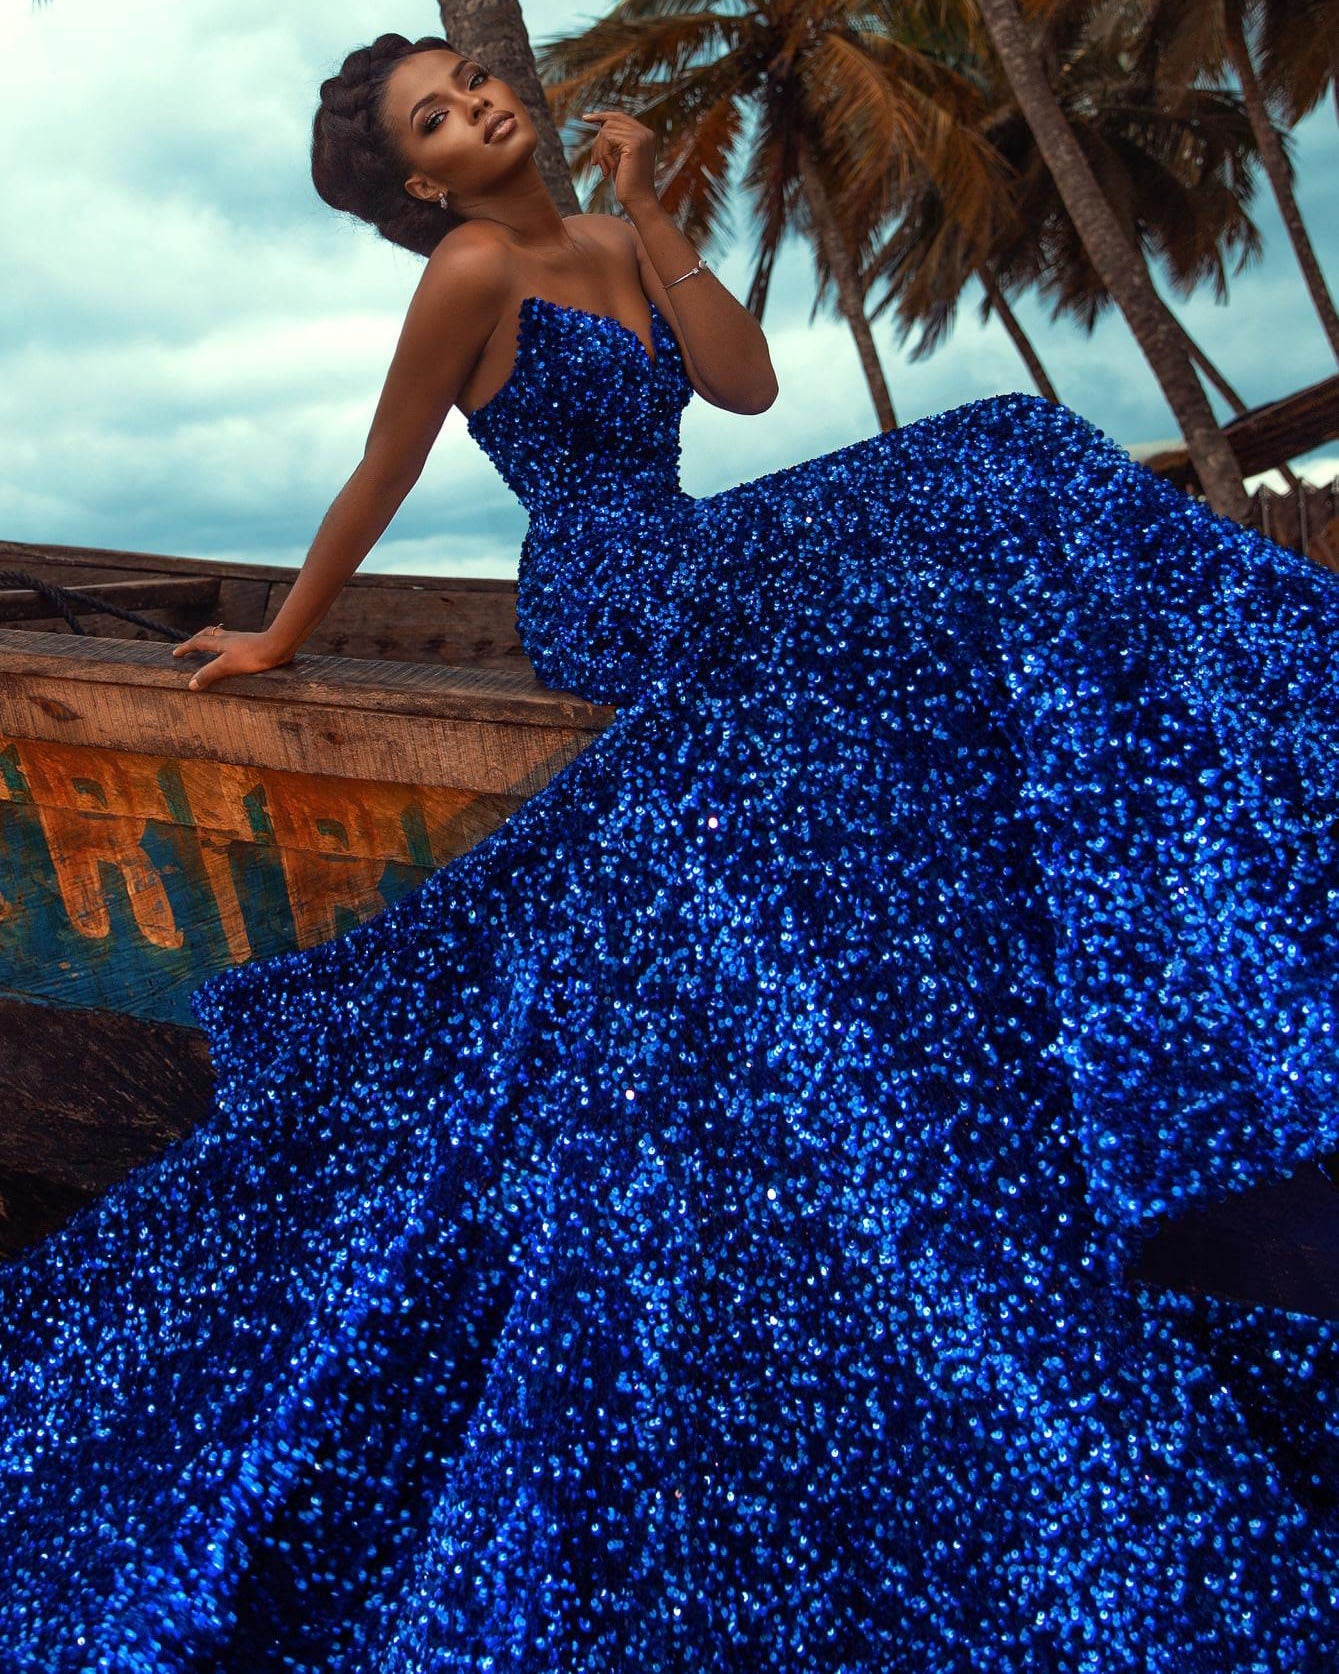 Discover more than 189 blue gown prom